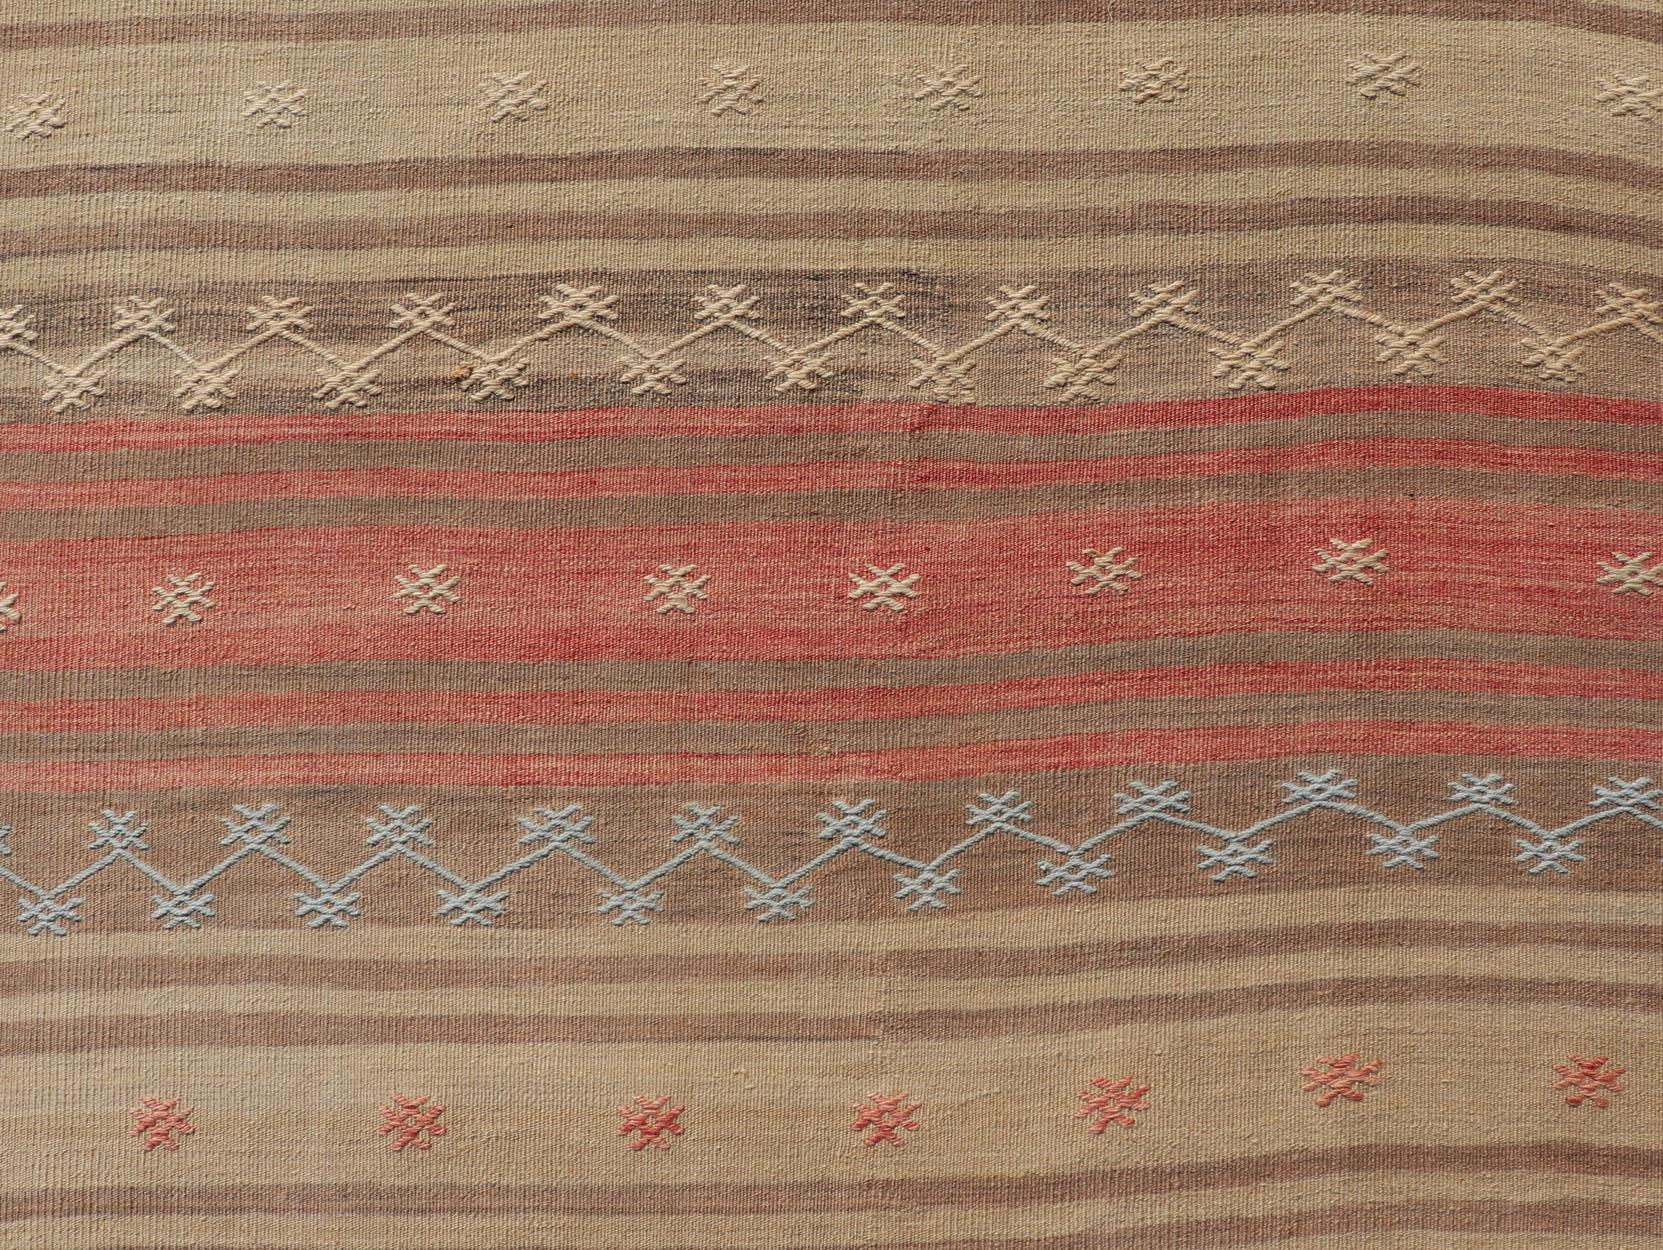 Vintage Turkish Kilim with Stripes in Blue, Tan, Brown, Cream and Orange For Sale 1